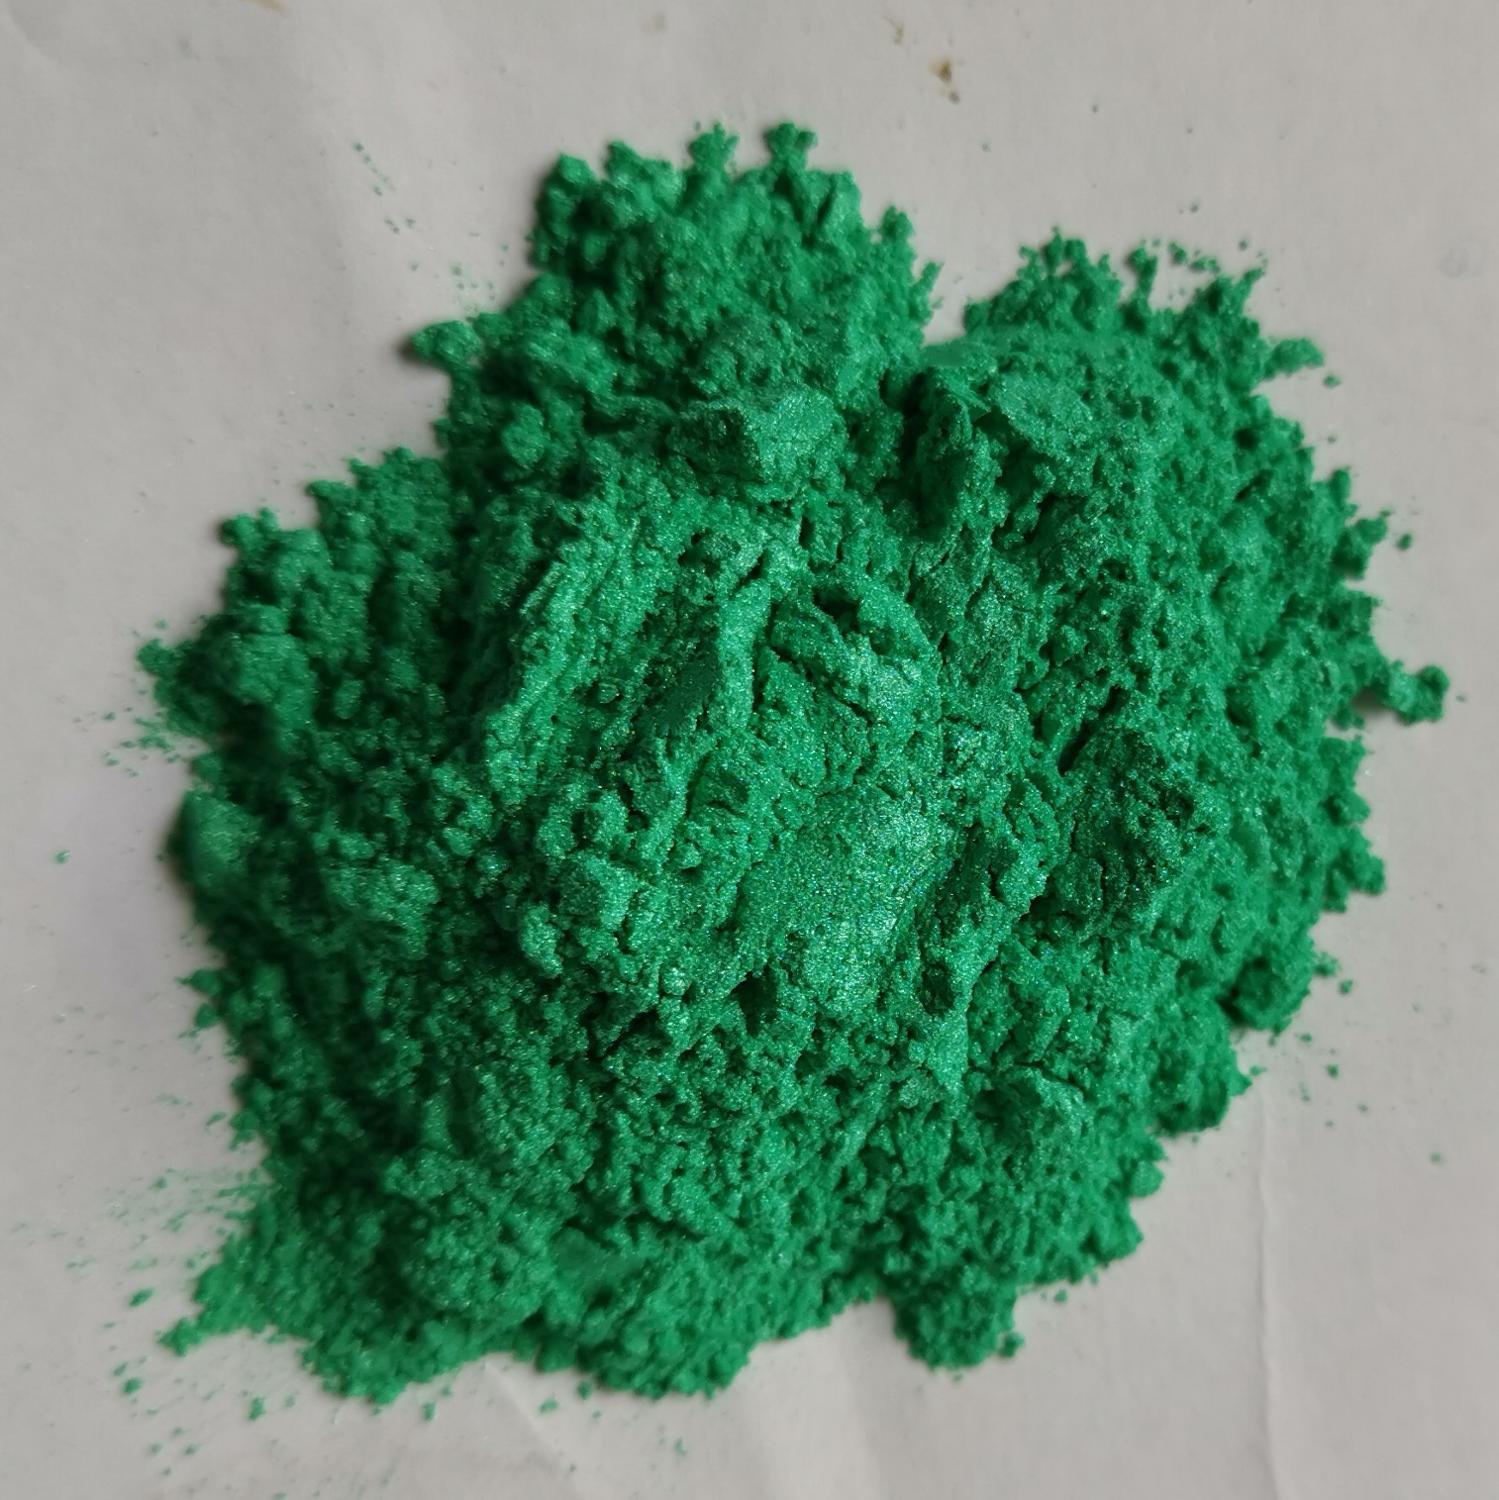 natural mica pearl pigment powder jade green 4506 for paints and cosmetics